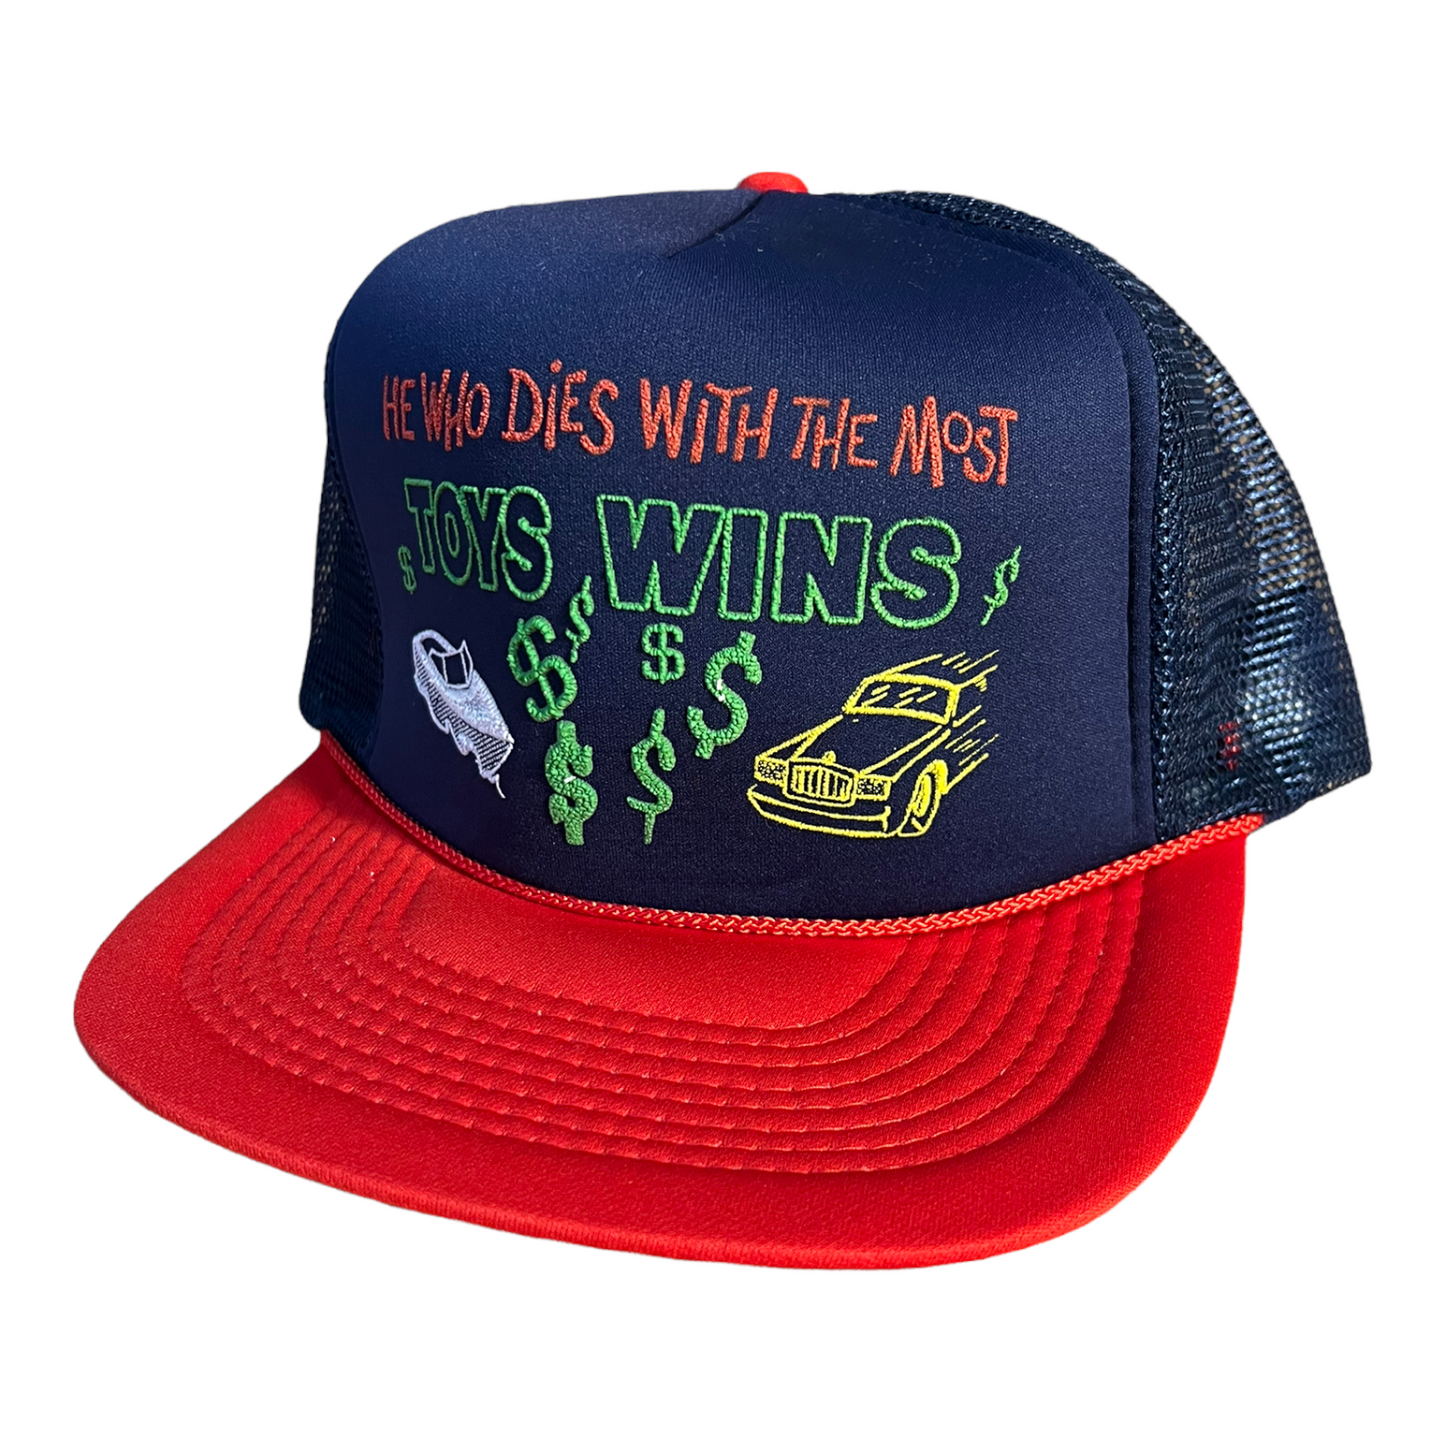 Vintage He Who Dies With The Most Toys Wins Trucker Hat Funny Hat